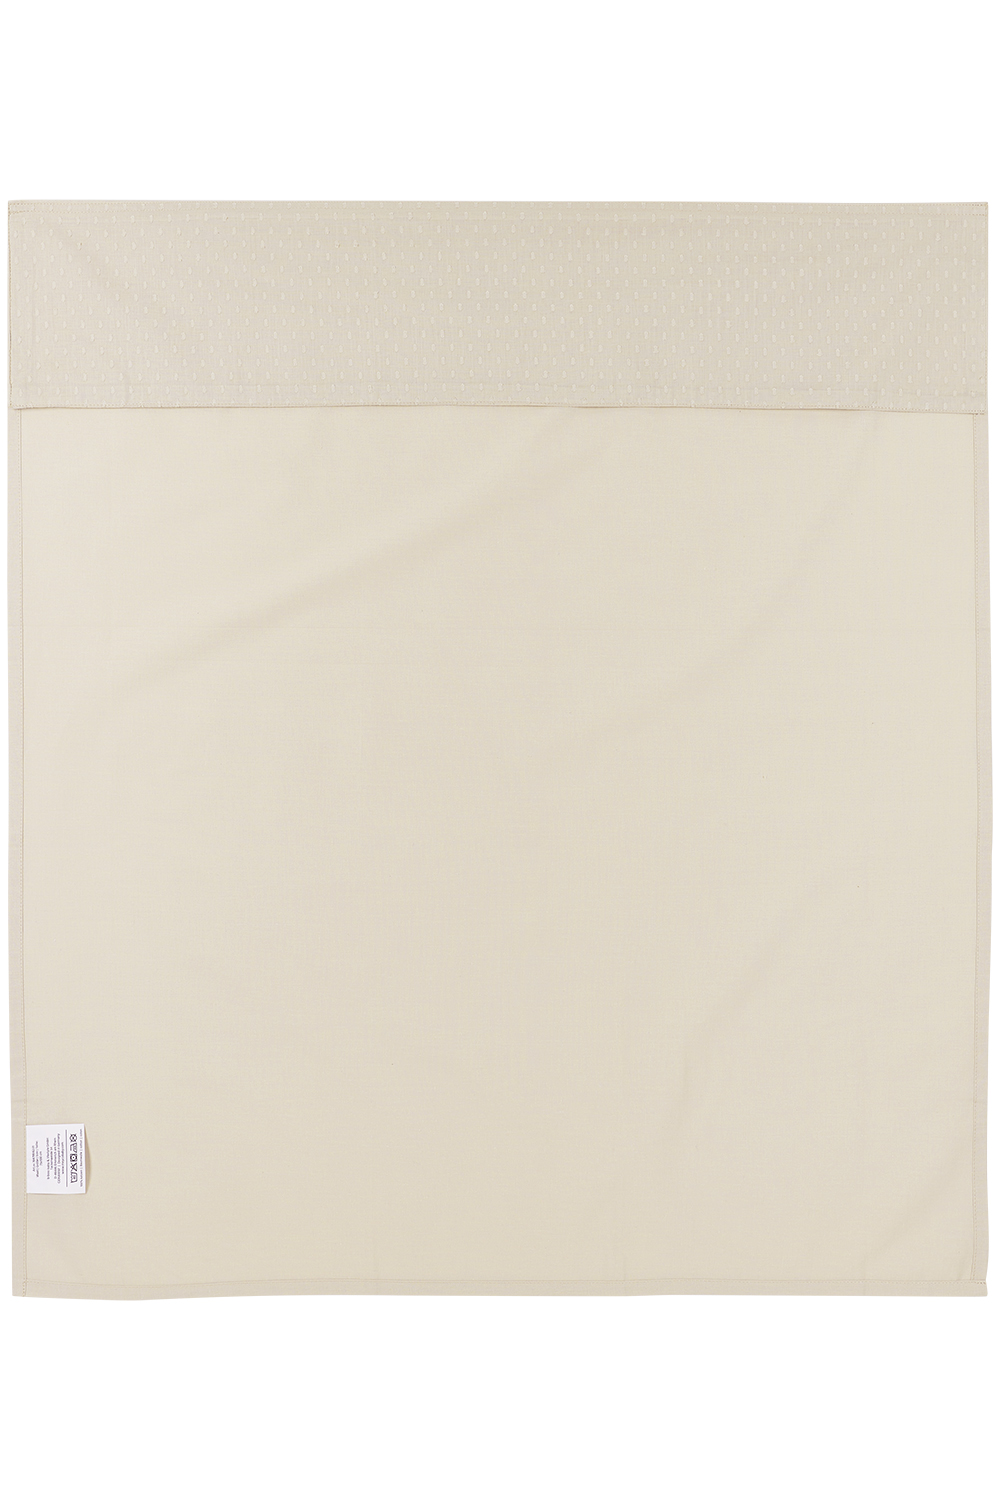 Cot bed sheet Plume - soft sand - 100x150cm